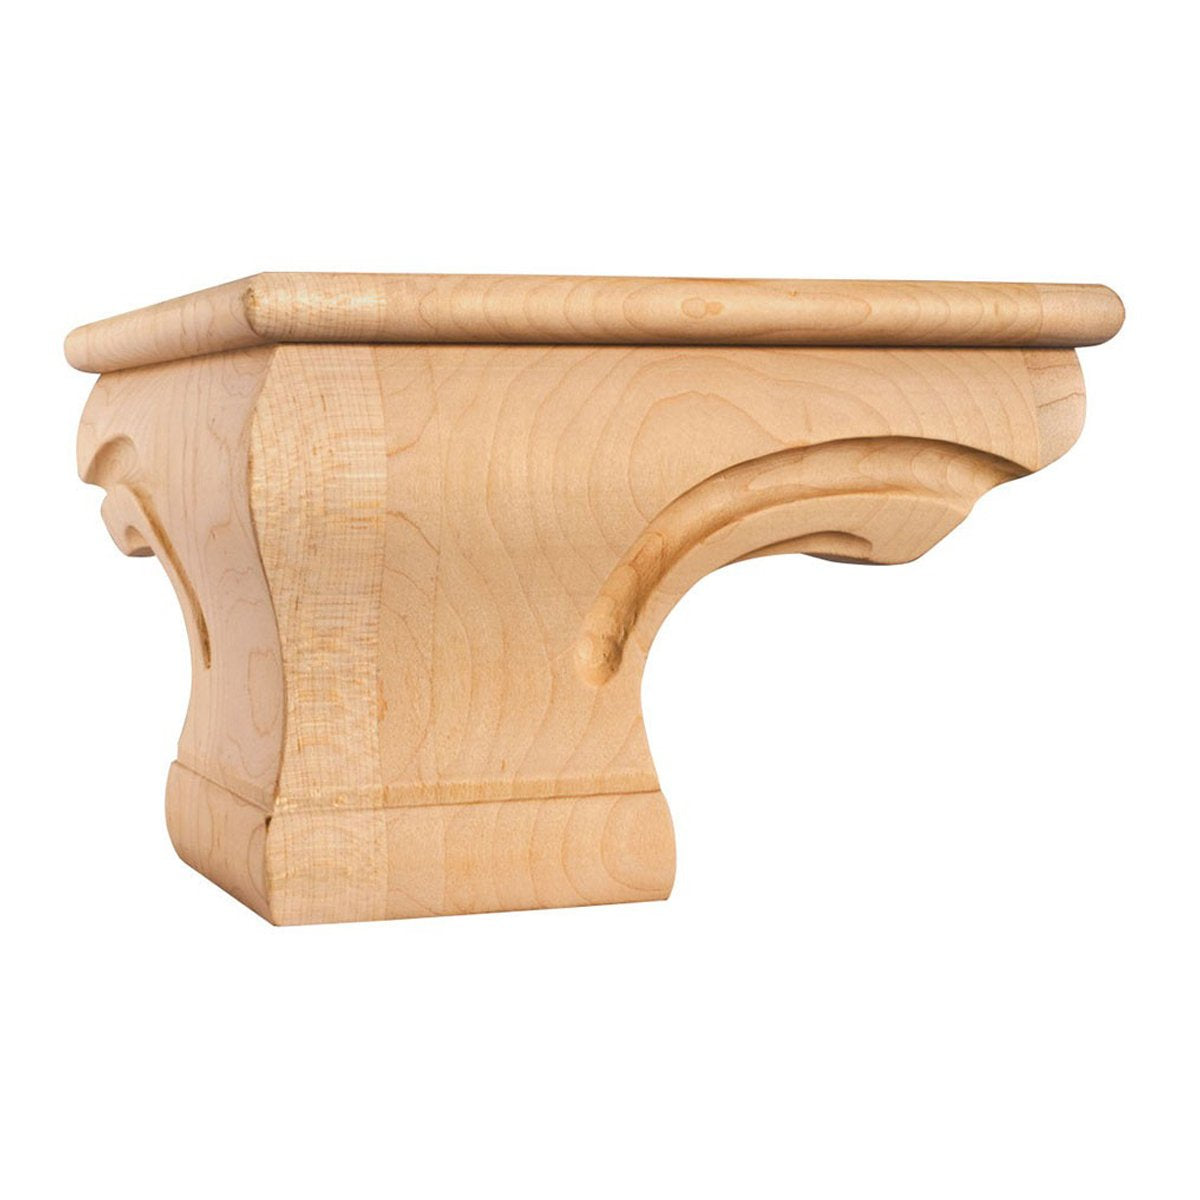 Hardware Resources 6-3/4" x 6-3/4" x 4-1/2" Oak Rounded Corner Pedestal Foot with Bead-DirectSinks